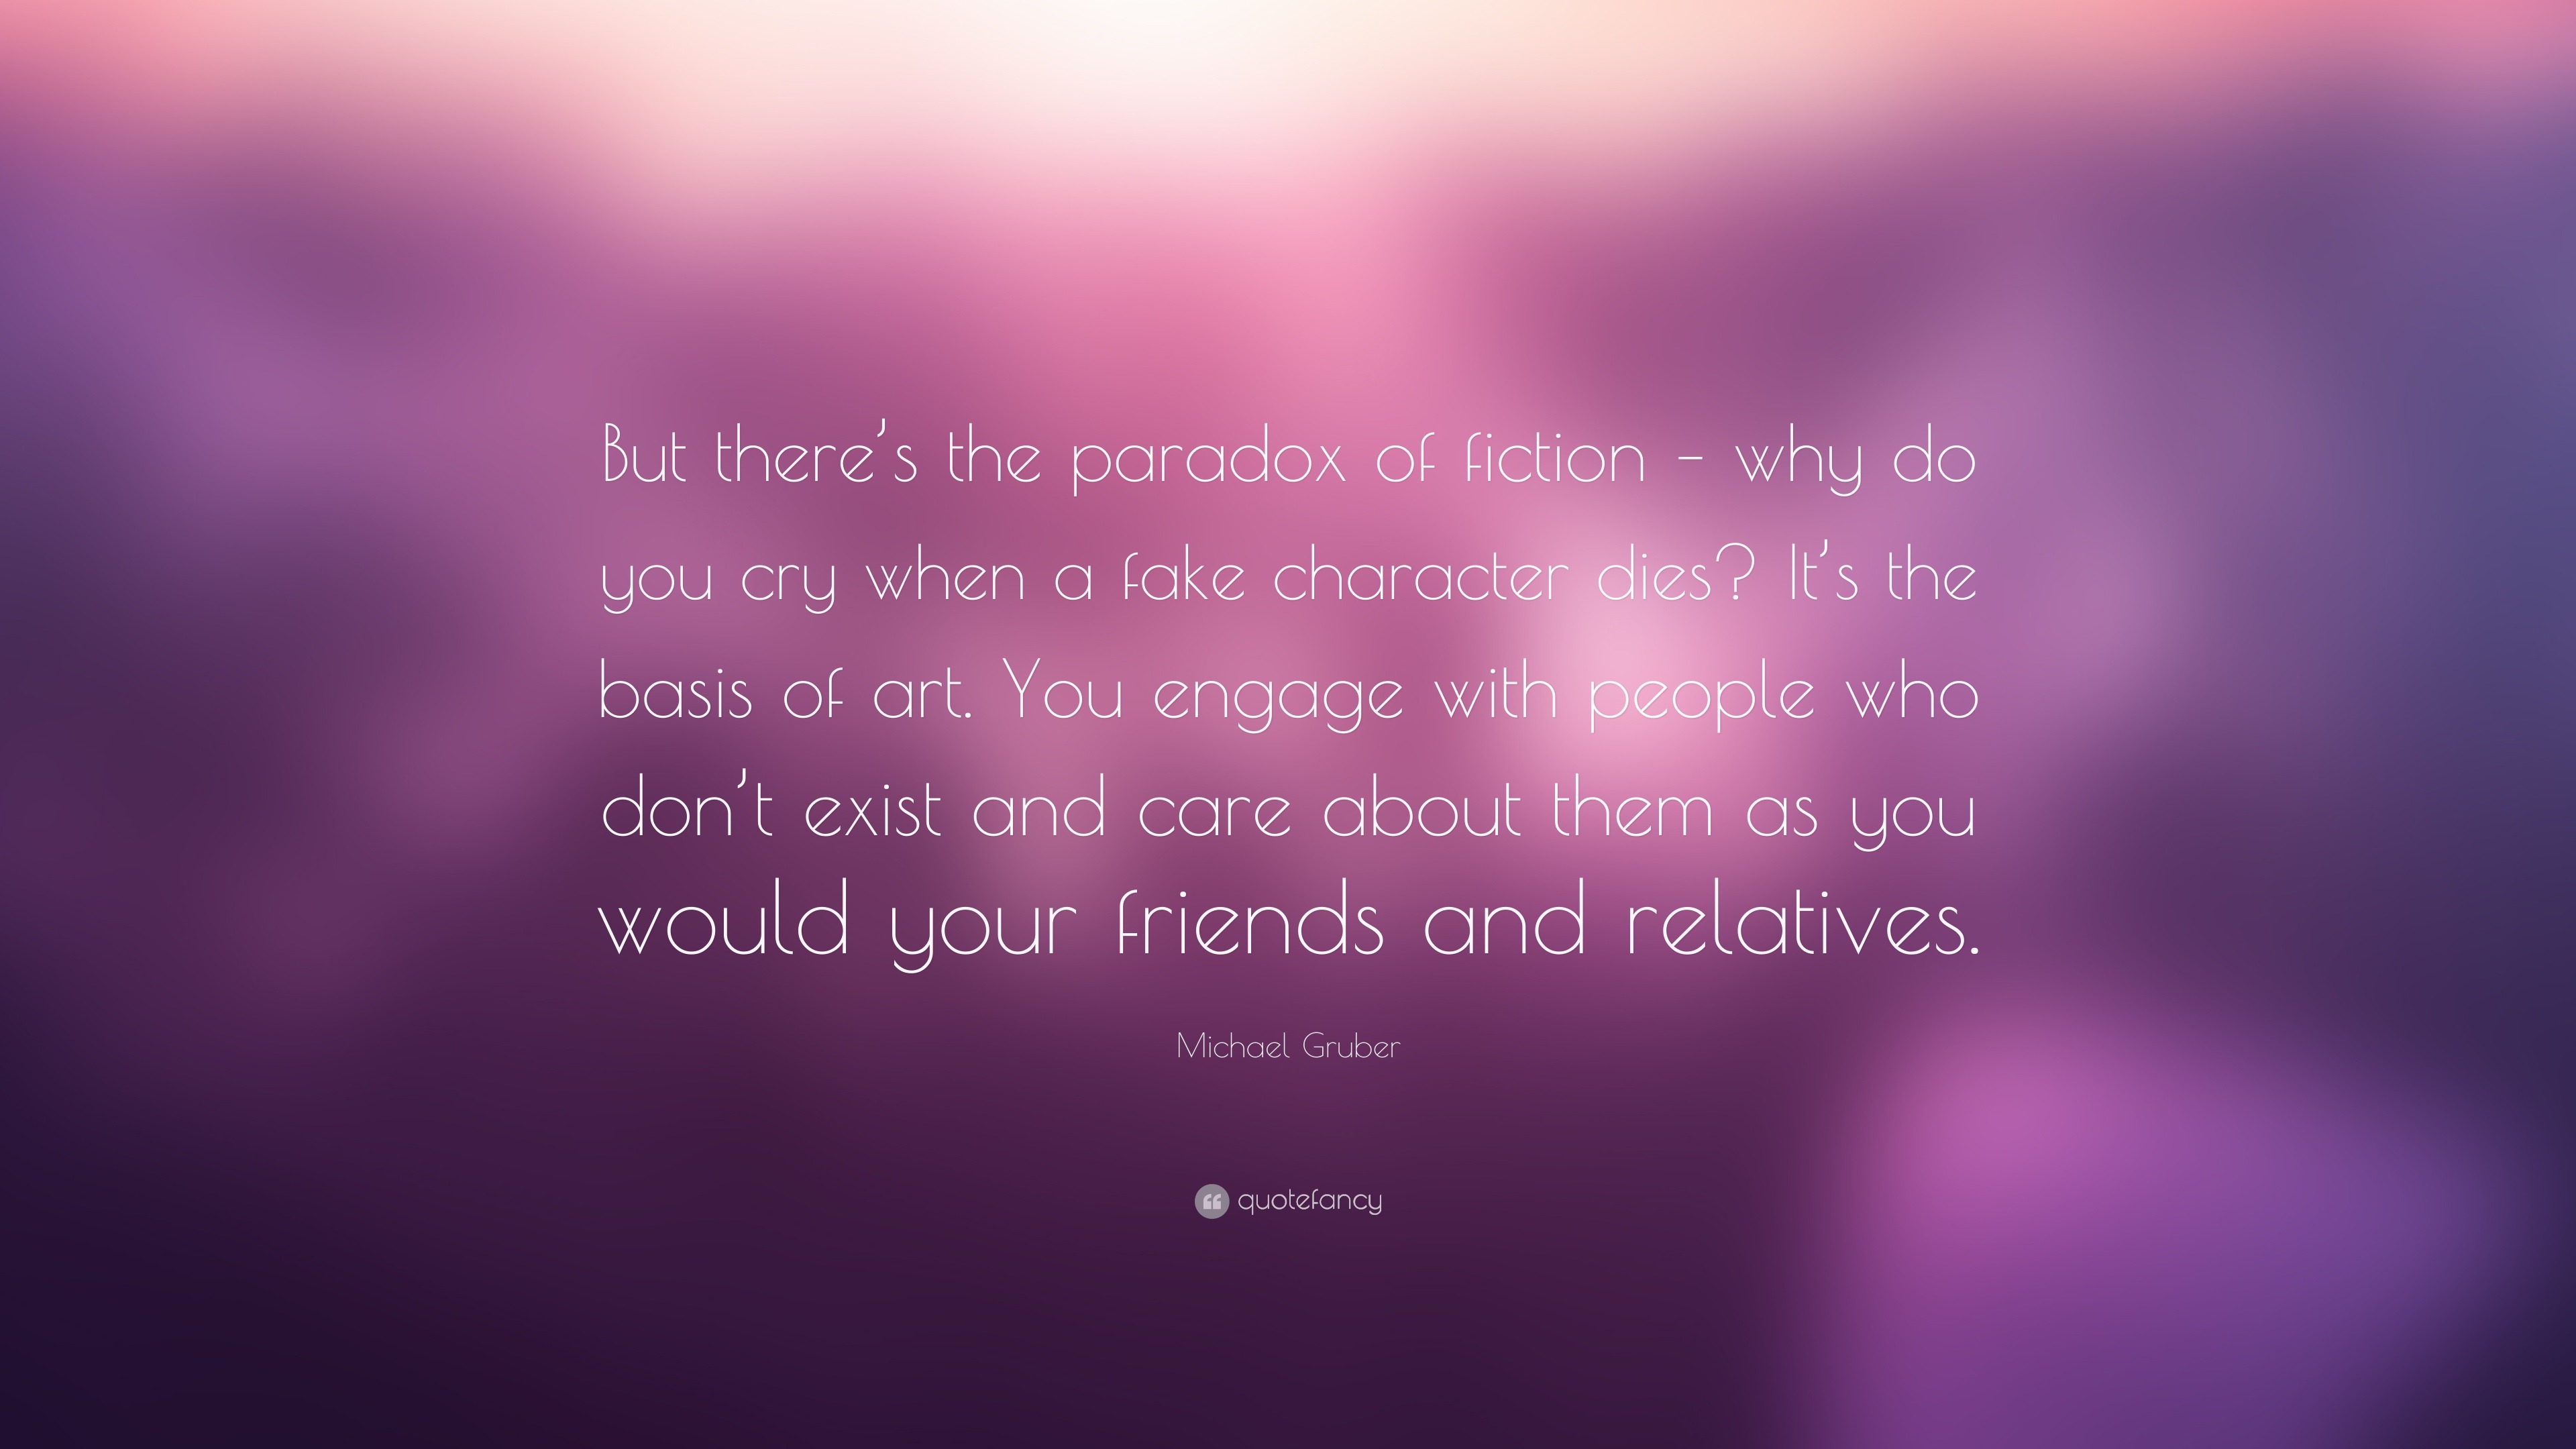 Michael Gruber Quote: “But there’s the paradox of fiction – why do you ...